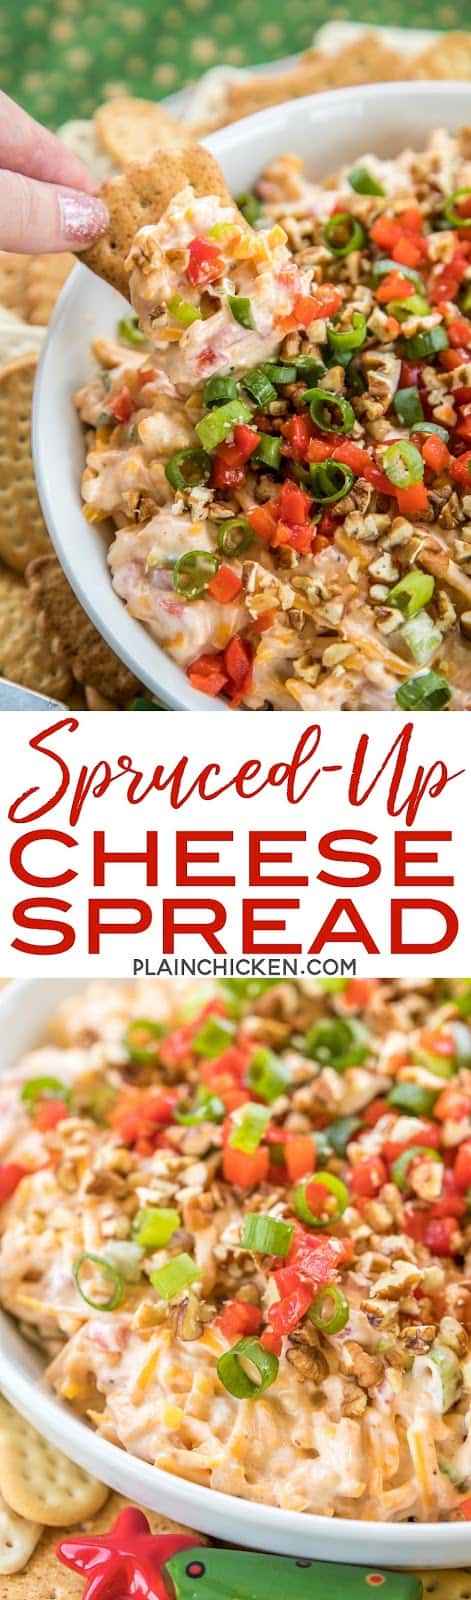 Spruced Up Cheese Spread recipe - CRAZY good!!! People go nuts over this dip!! It is like pimento cheese on steroids - pimento, onion, mayonnaise, mustard, Worcestershire sauce, celery seed, paprika, garlic salt, cheddar cheese and pecans. Serve with crackers and veggies. Can make several days in advance and refrigerate until ready to serve. This is always the first thing to go at parties!! SO good! #pimentocheese #appetizer #diprecipe #cheese